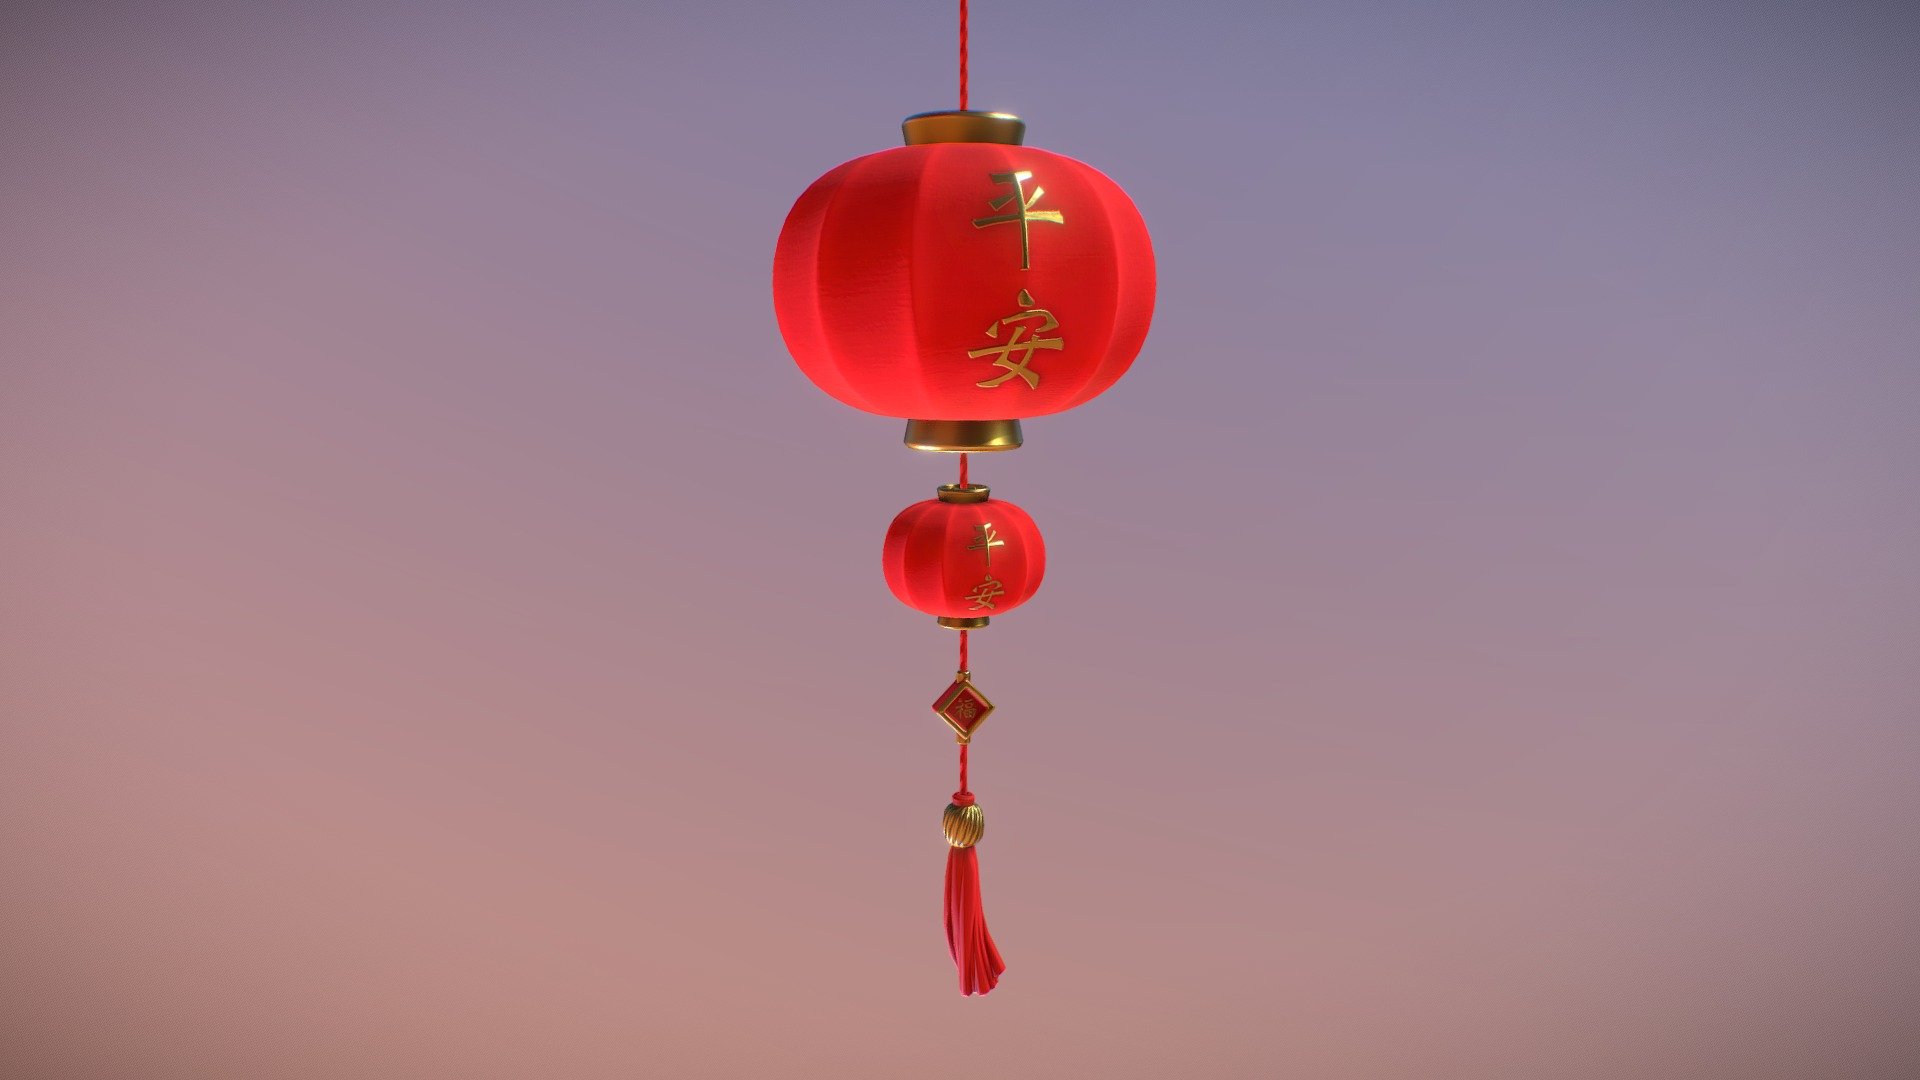 Chinese Lantern - Game Ready

7,566 triangles, PBR material

2048*2048 Diffuse, Metallic, Roughness, Normal, Emission, Height

File Format :




Blender 2.9+

FBX

OBJ

TGA

Check out the high poly model used to create this lantern: https://skfb.ly/oss9C - Chinese Lantern - Game Ready - Buy Royalty Free 3D model by Anthony Ferrandiz (@AnthonyFerrandiz) 3d model